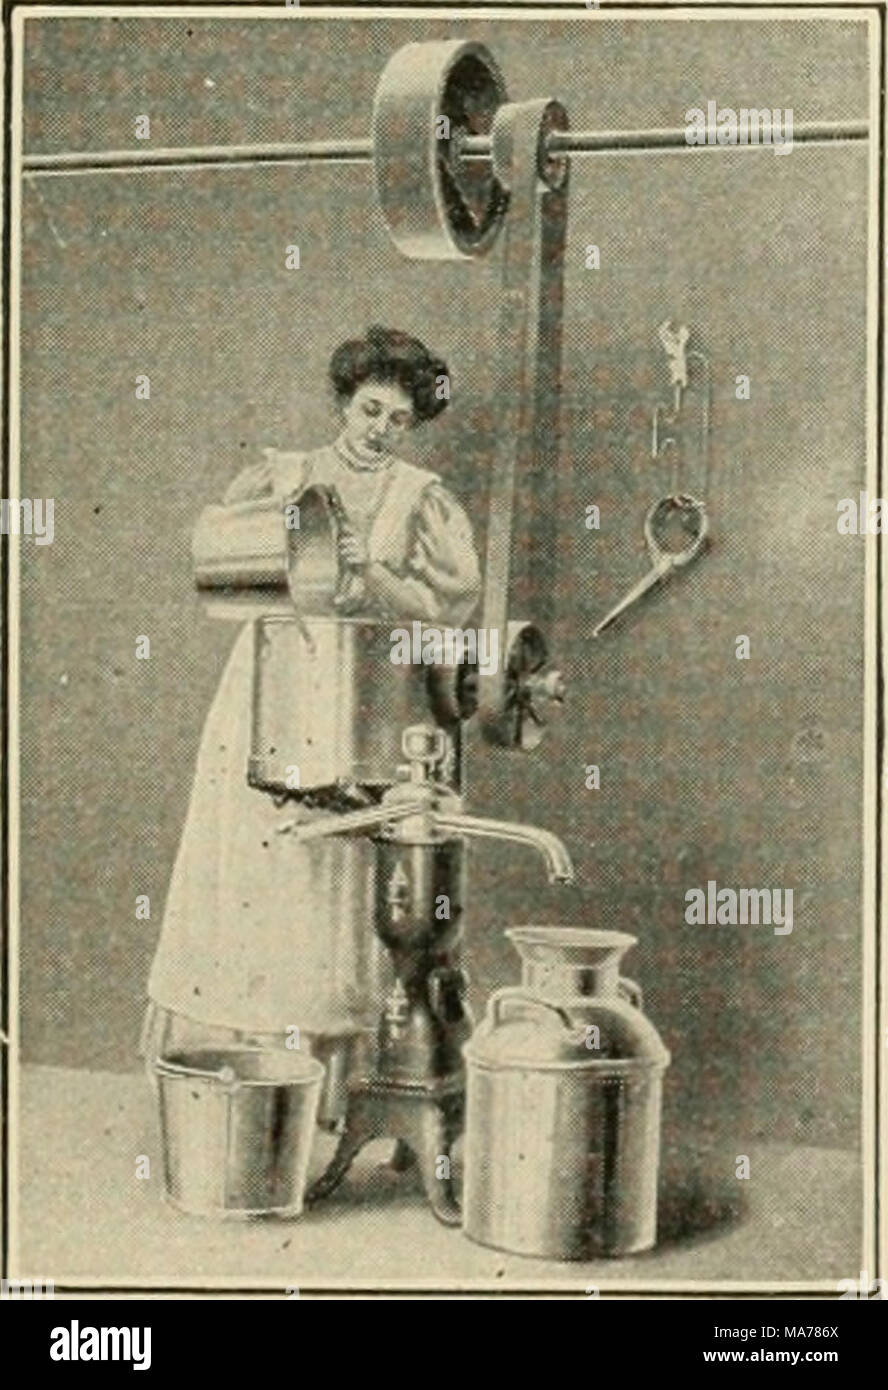 . Elementary agriculture . Fig. 19. The new way— en inn separator. cream back and forth The old way of separating cream. The worker firmly rolls and does not rub it, because that destroys the grain. When the butter is free from but- termilk, it can be made into a tempting lump and stamp- ed and rolled in oiled paper. Butter is judged for its flavor, color, grain, and the amount of salt, but in a great measure it is judged by its general appearance. The Churn. Farmers, to- day, prefer the barrel churn, without a dasher. In opera- tion this churn throws the against its sides. Churns Stock Photo